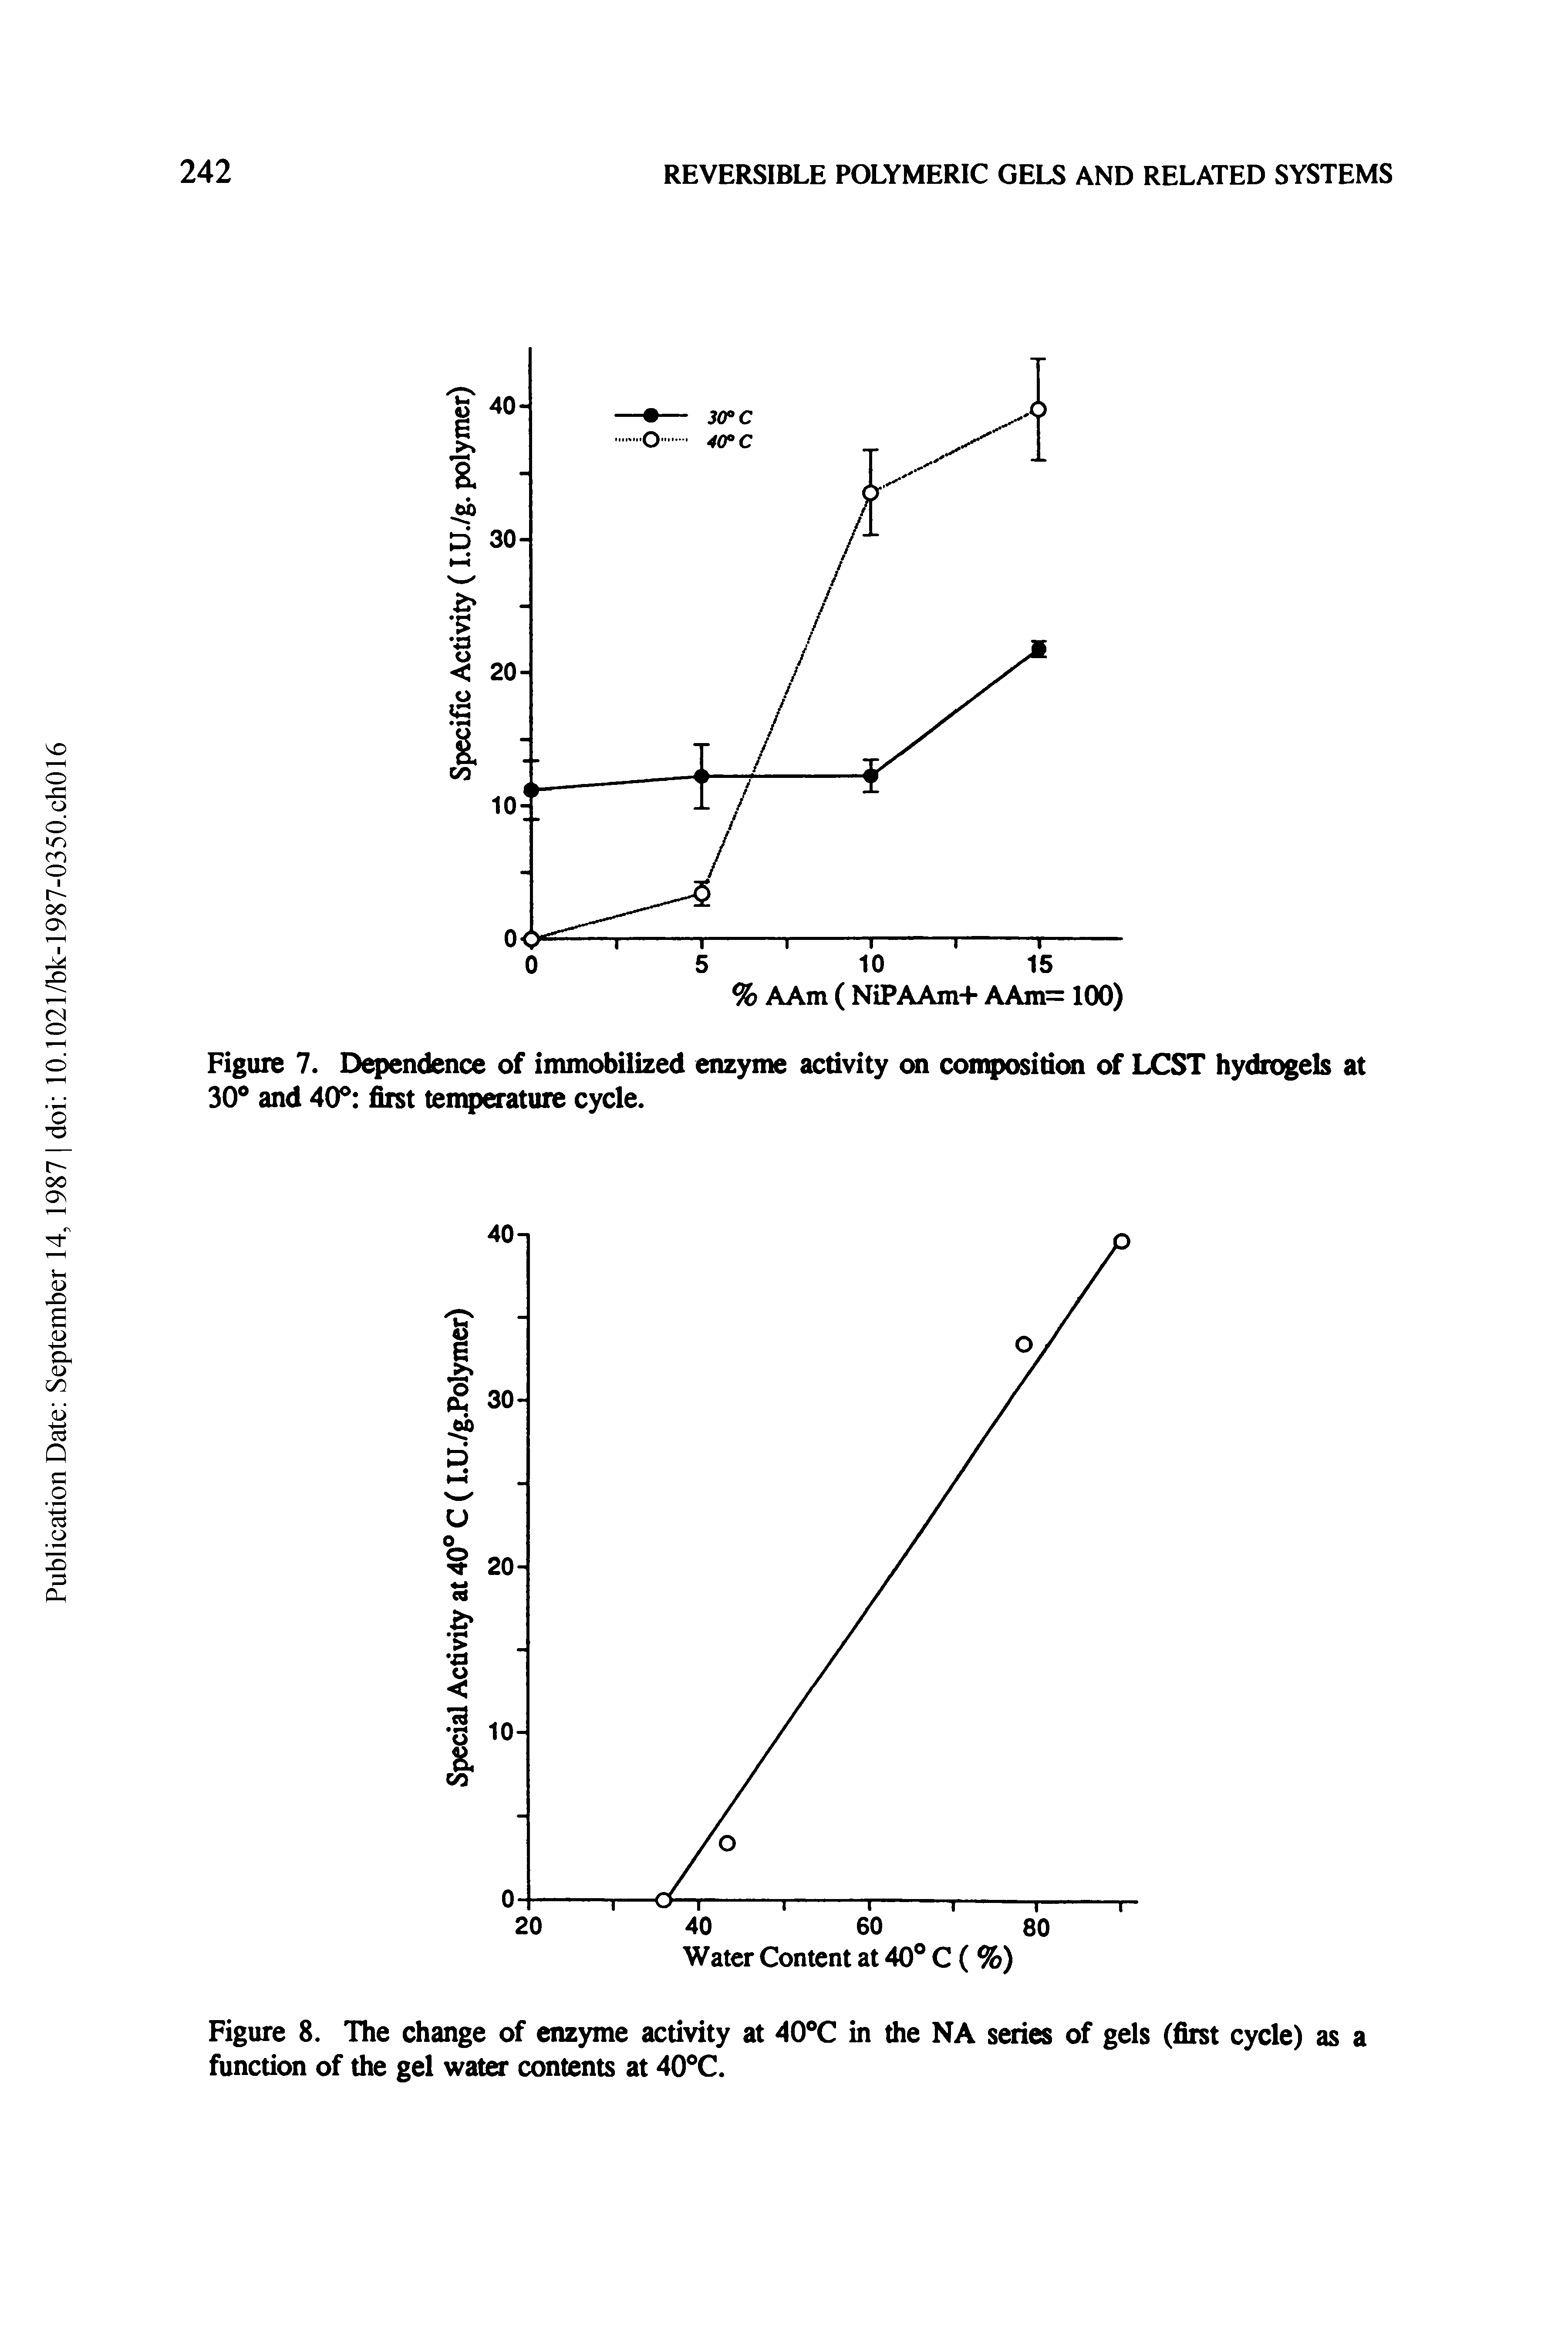 Figure 8. The change of enzyme activity at 40 C in the NA series of gels (first cycle) as a function of the gel water contents at 40 C.